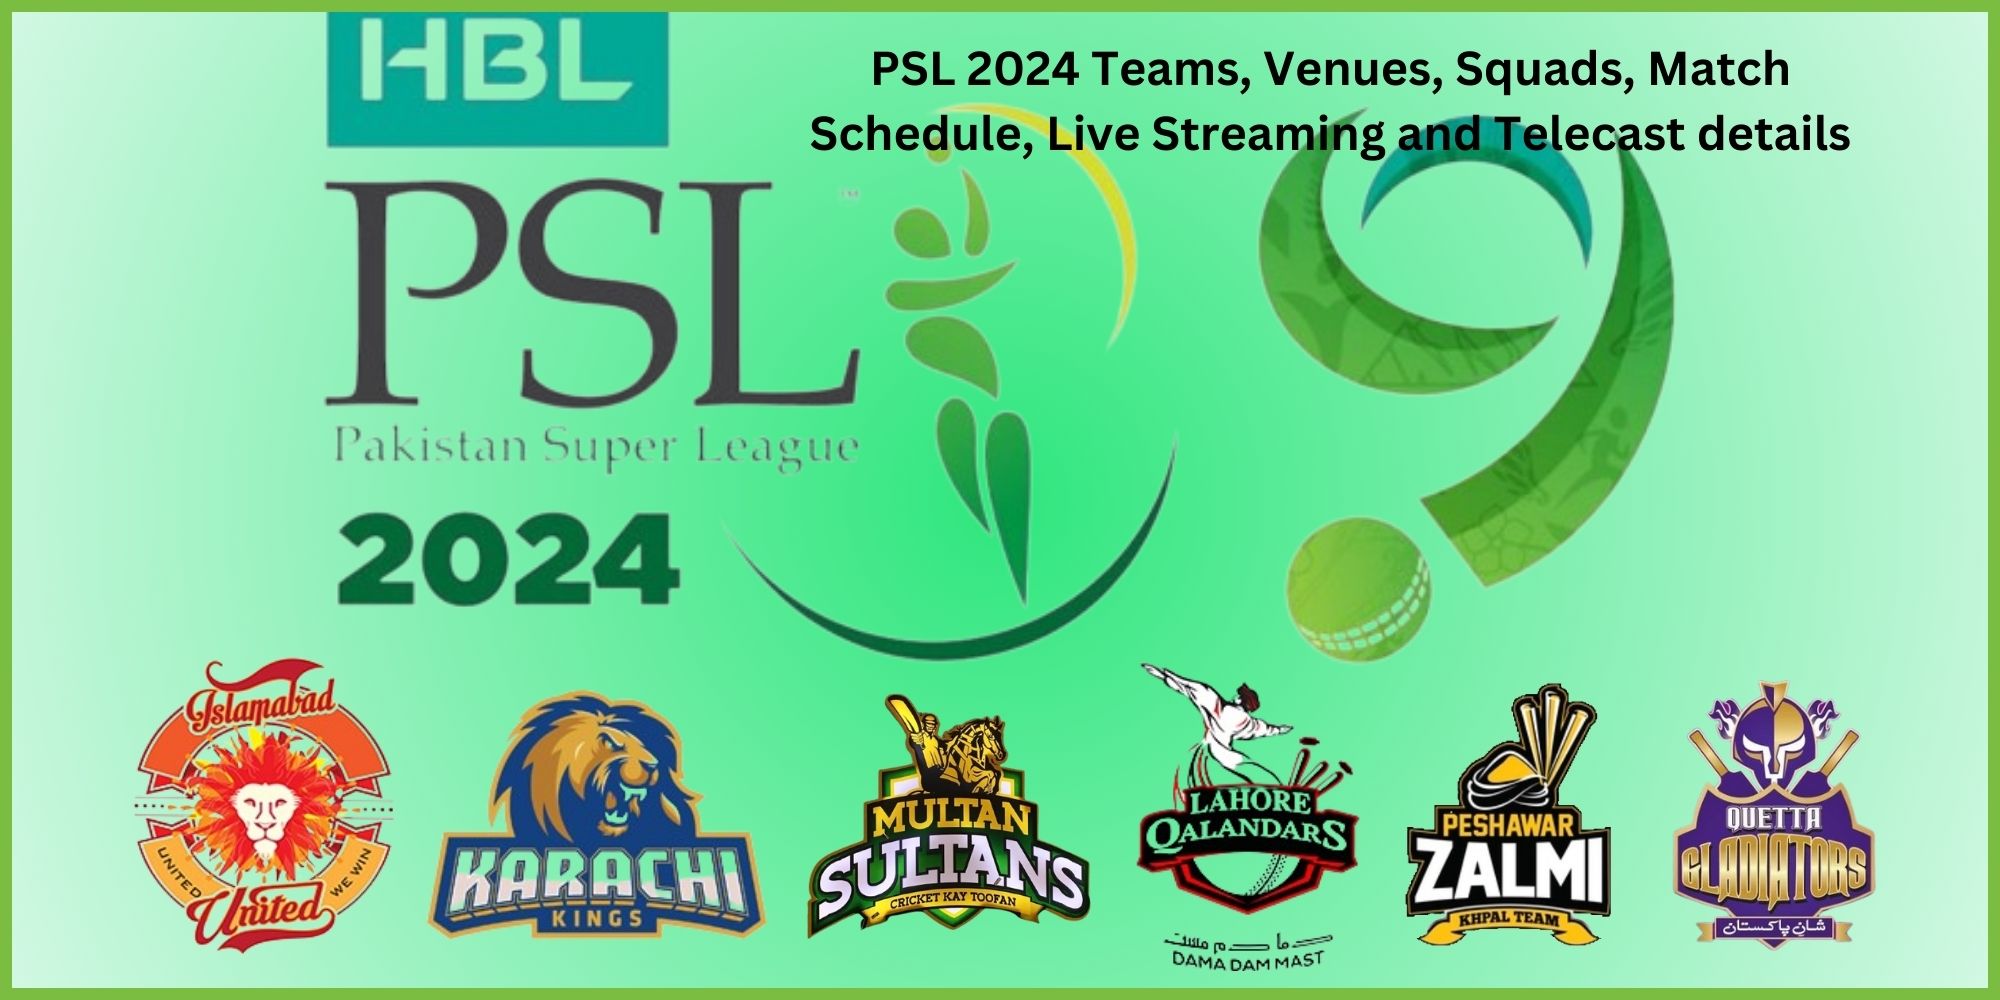 PSL 2024 Teams, Venues, Squads, Match Schedule, Live Streaming and Telecast details